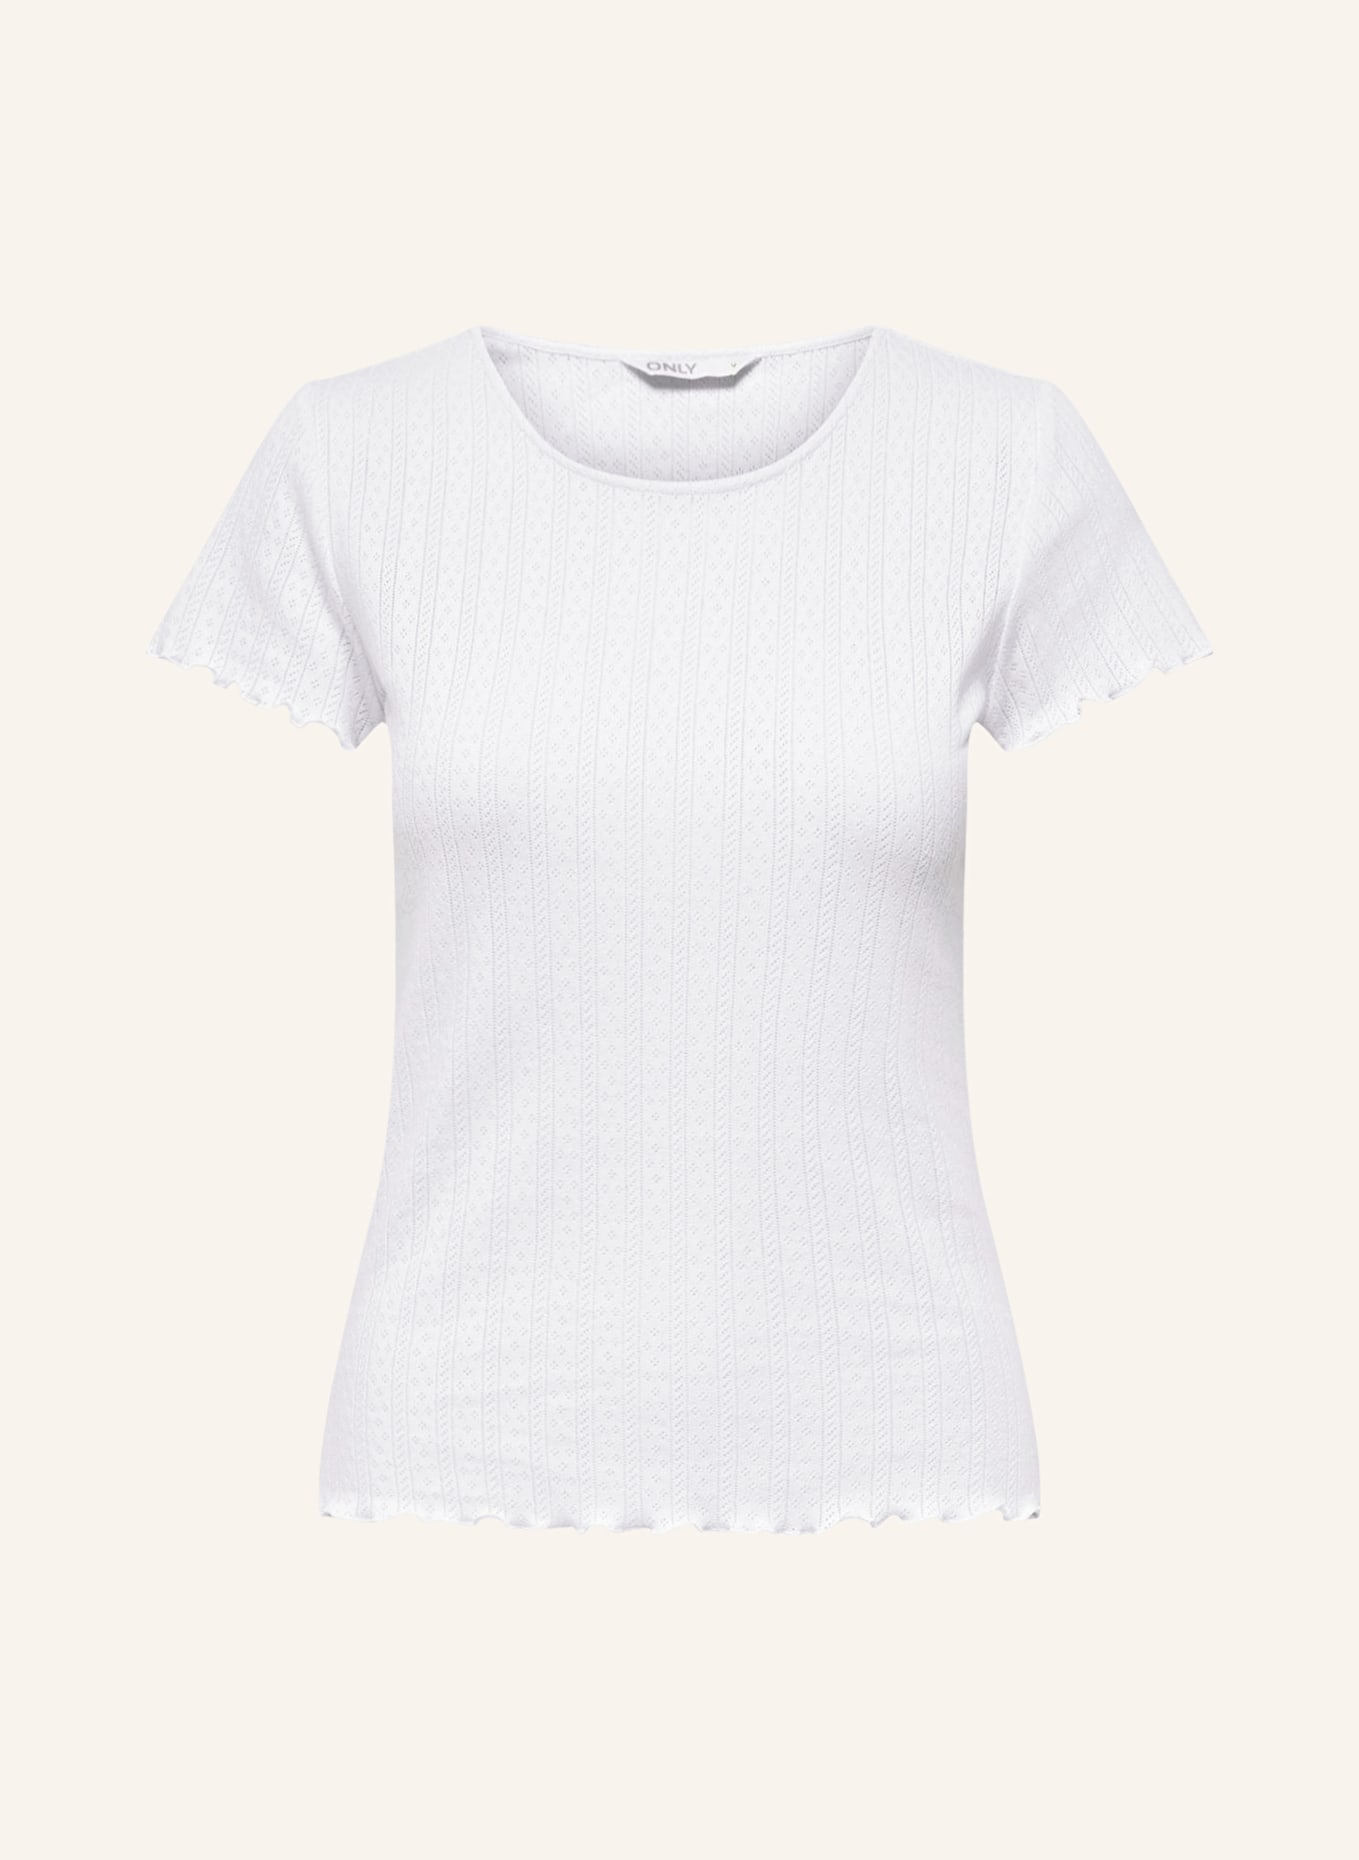 ONLY T-shirt, Color: WHITE (Image 1)